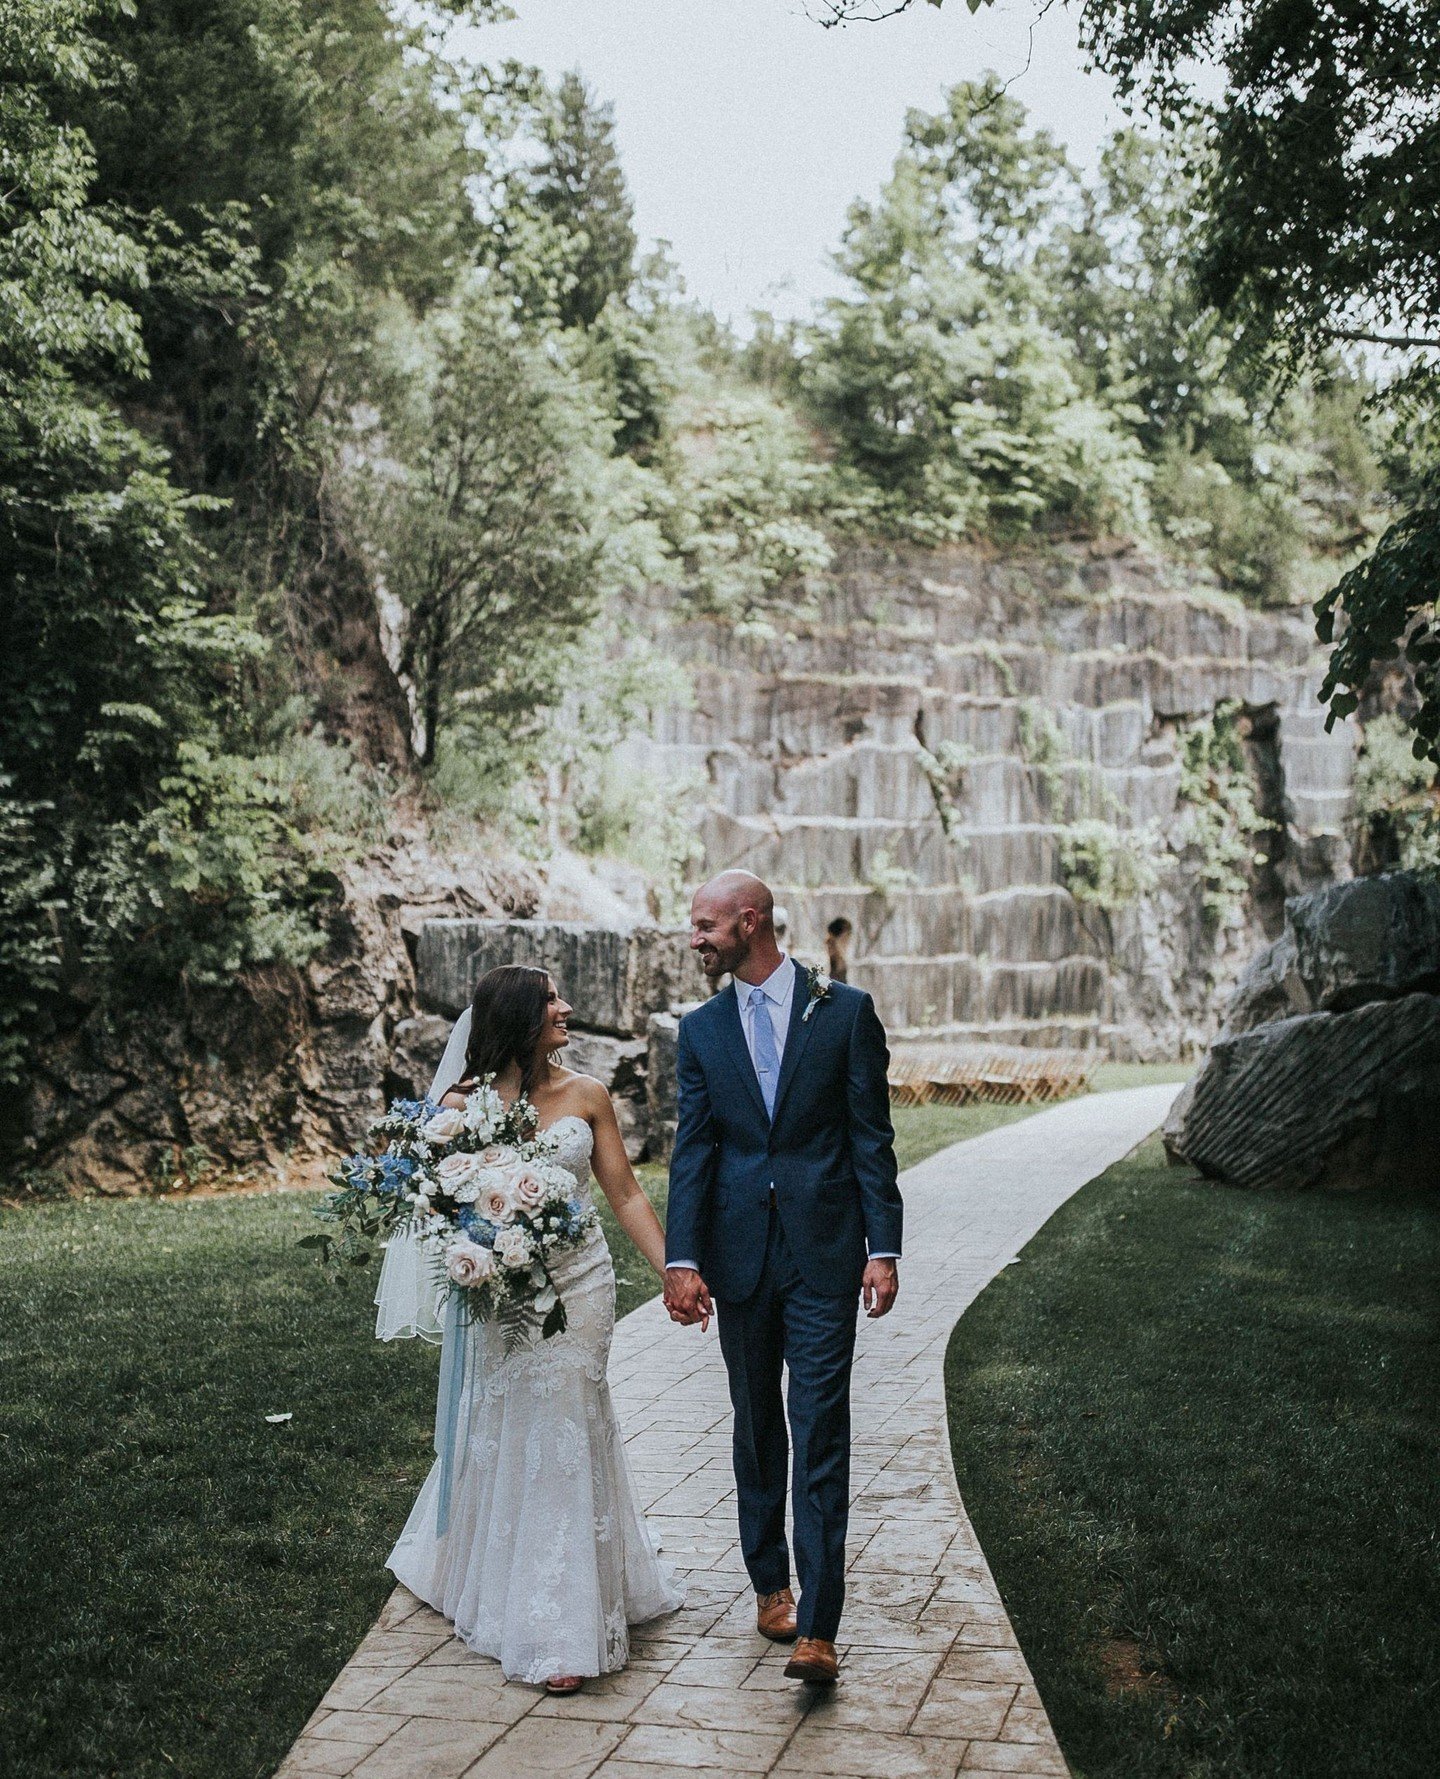 The Canyon | The Couple | The Bouquet⁠